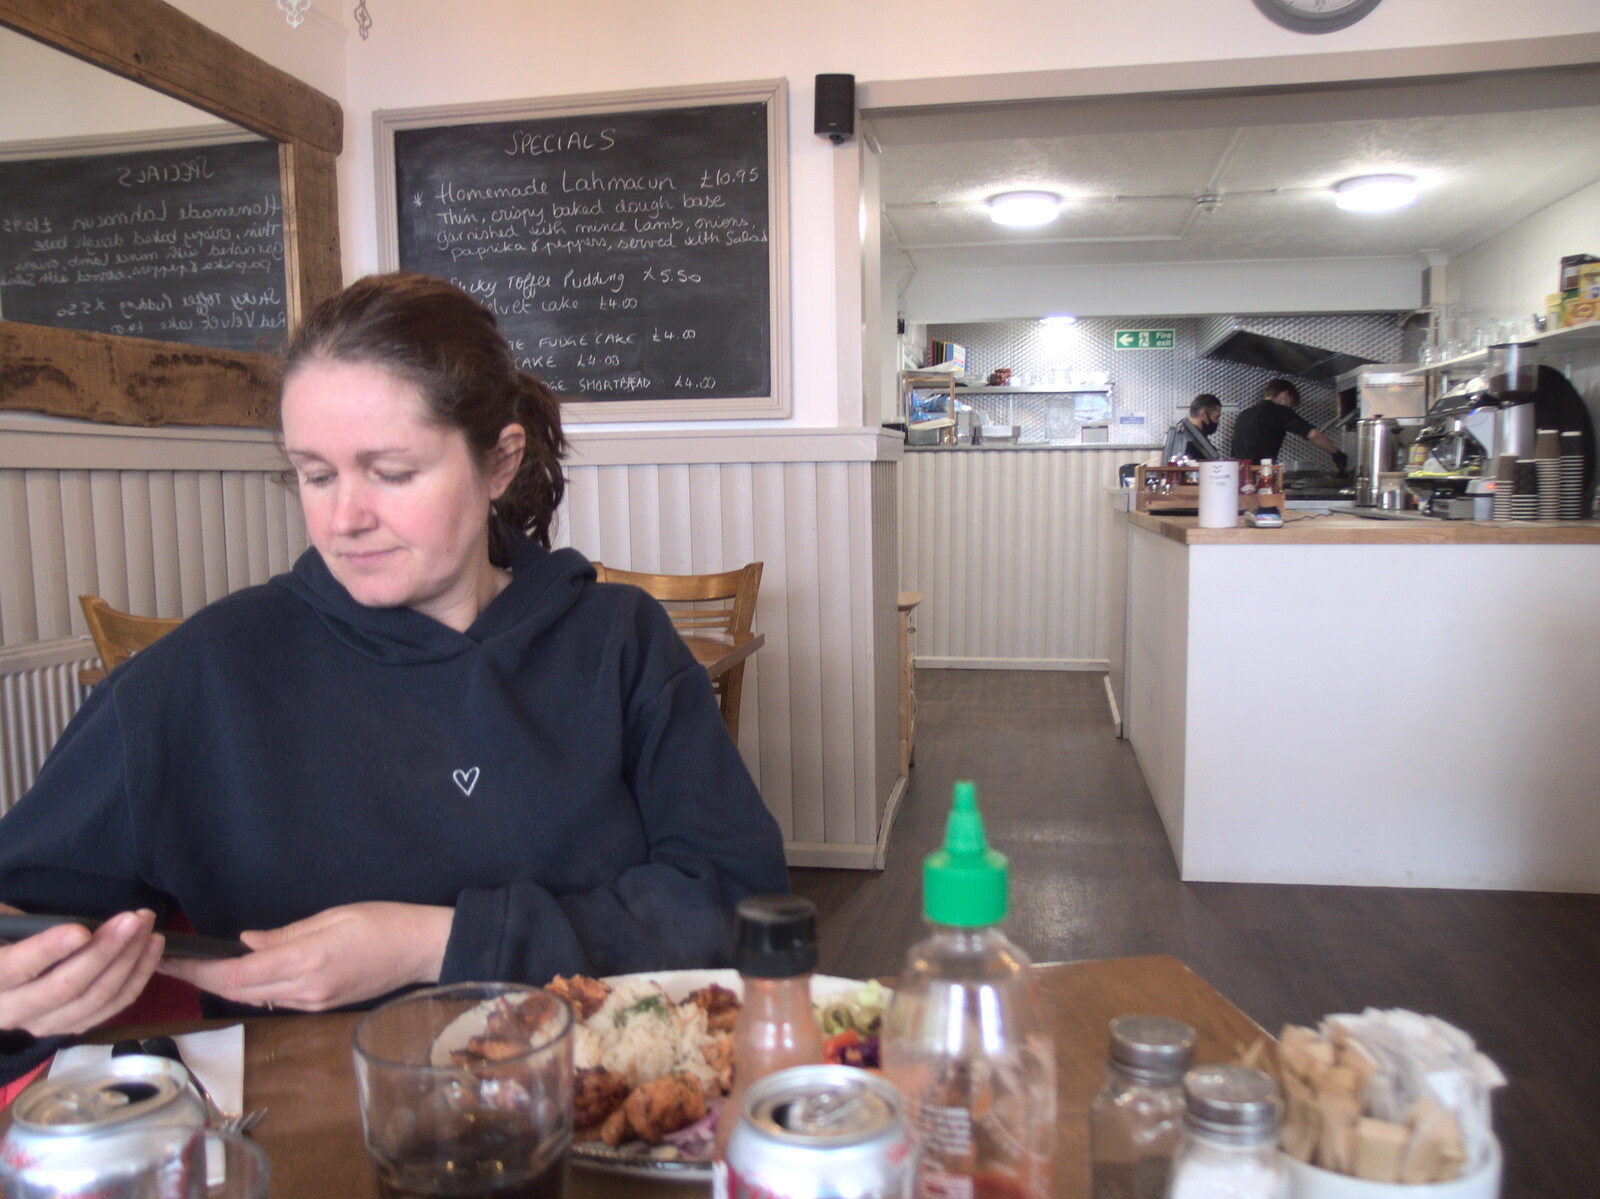 Isobel checks her phone from The Swan Inn: An Epilogue, Brome, Suffolk - 17th February 2022